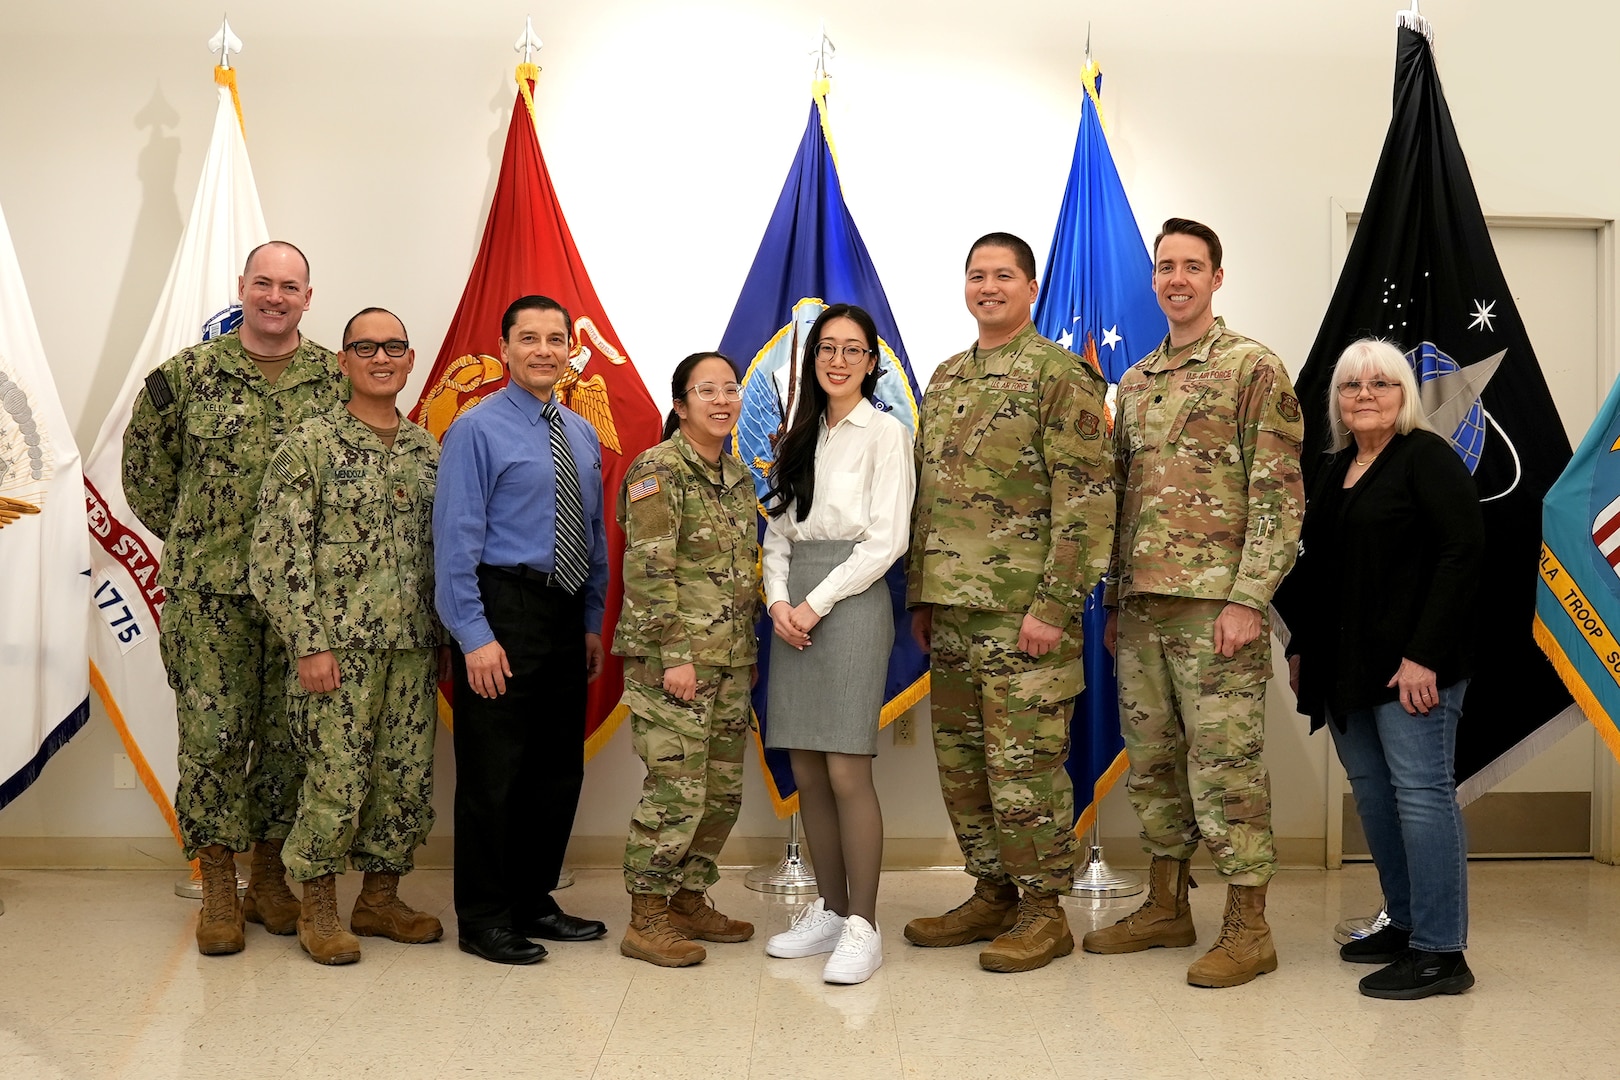 The DLA Troop Support Customer Pharmacy Operations Center Team worked with industry to create a software platform that helps secure the supply of active pharmaceutical ingredients. (photo by Ed Maldonado)